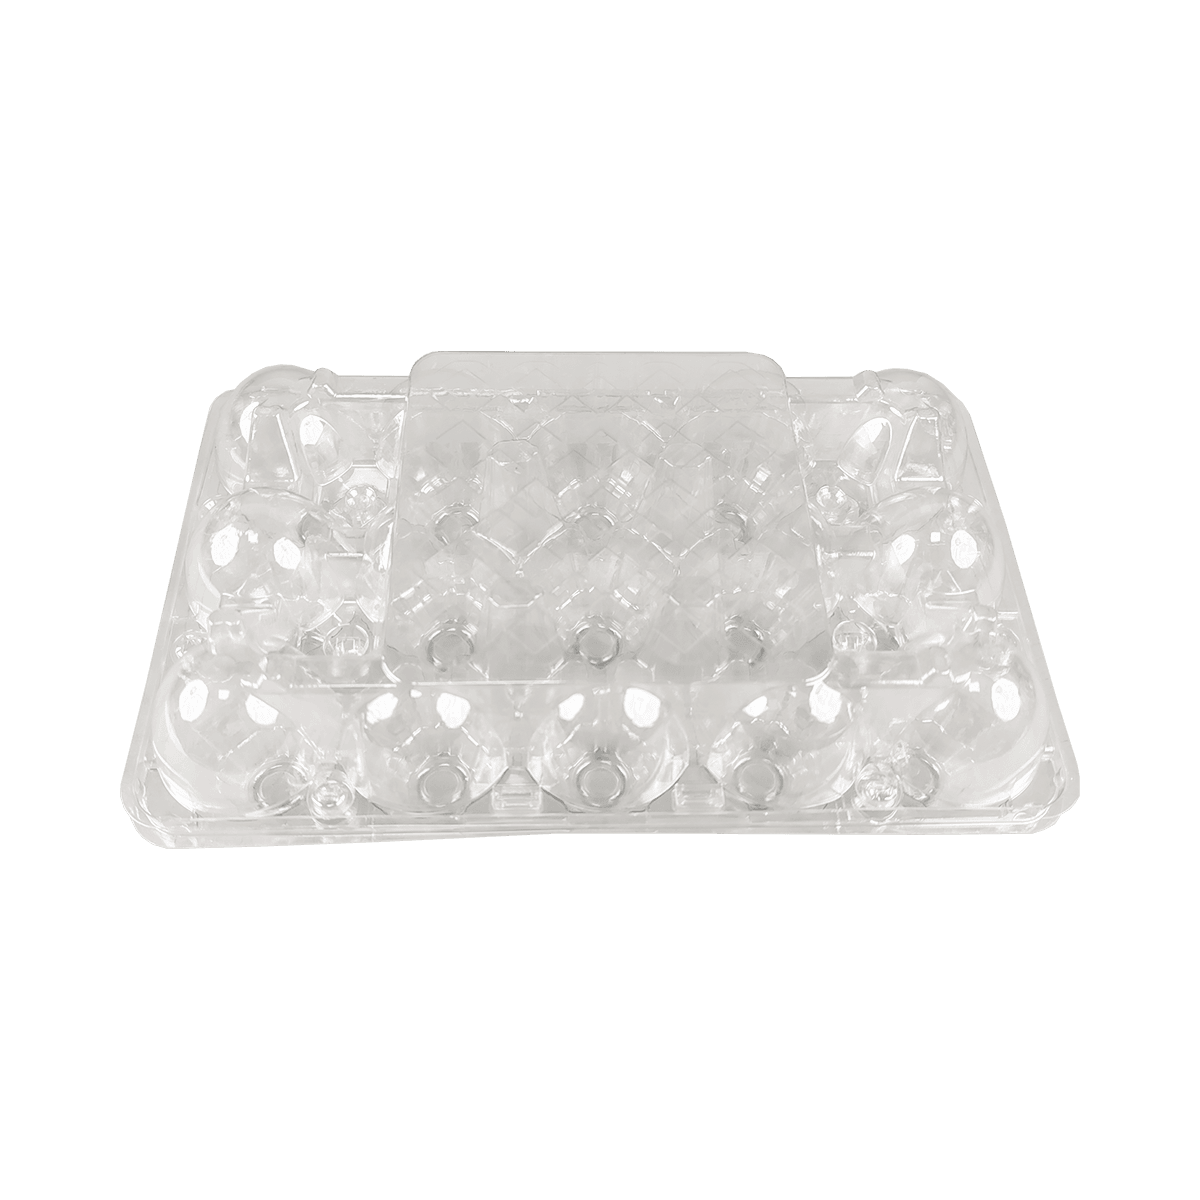 Environmentally friendly PET Transparent 15 egg cartons are suitable for chicken farms and market displays